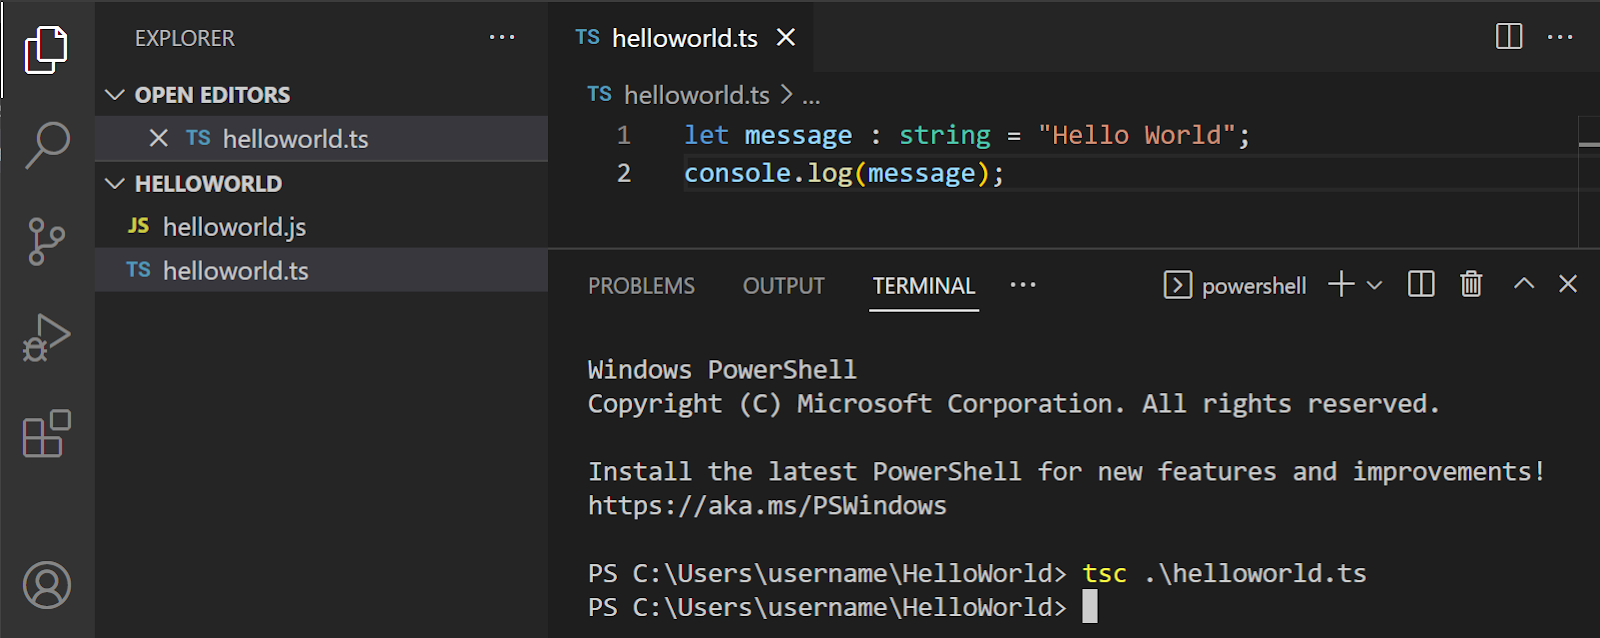 step 6: To compile the TypeScript code, simply open the Integrated Terminal (Ctrl+`) and type:
tsc helloworld.ts